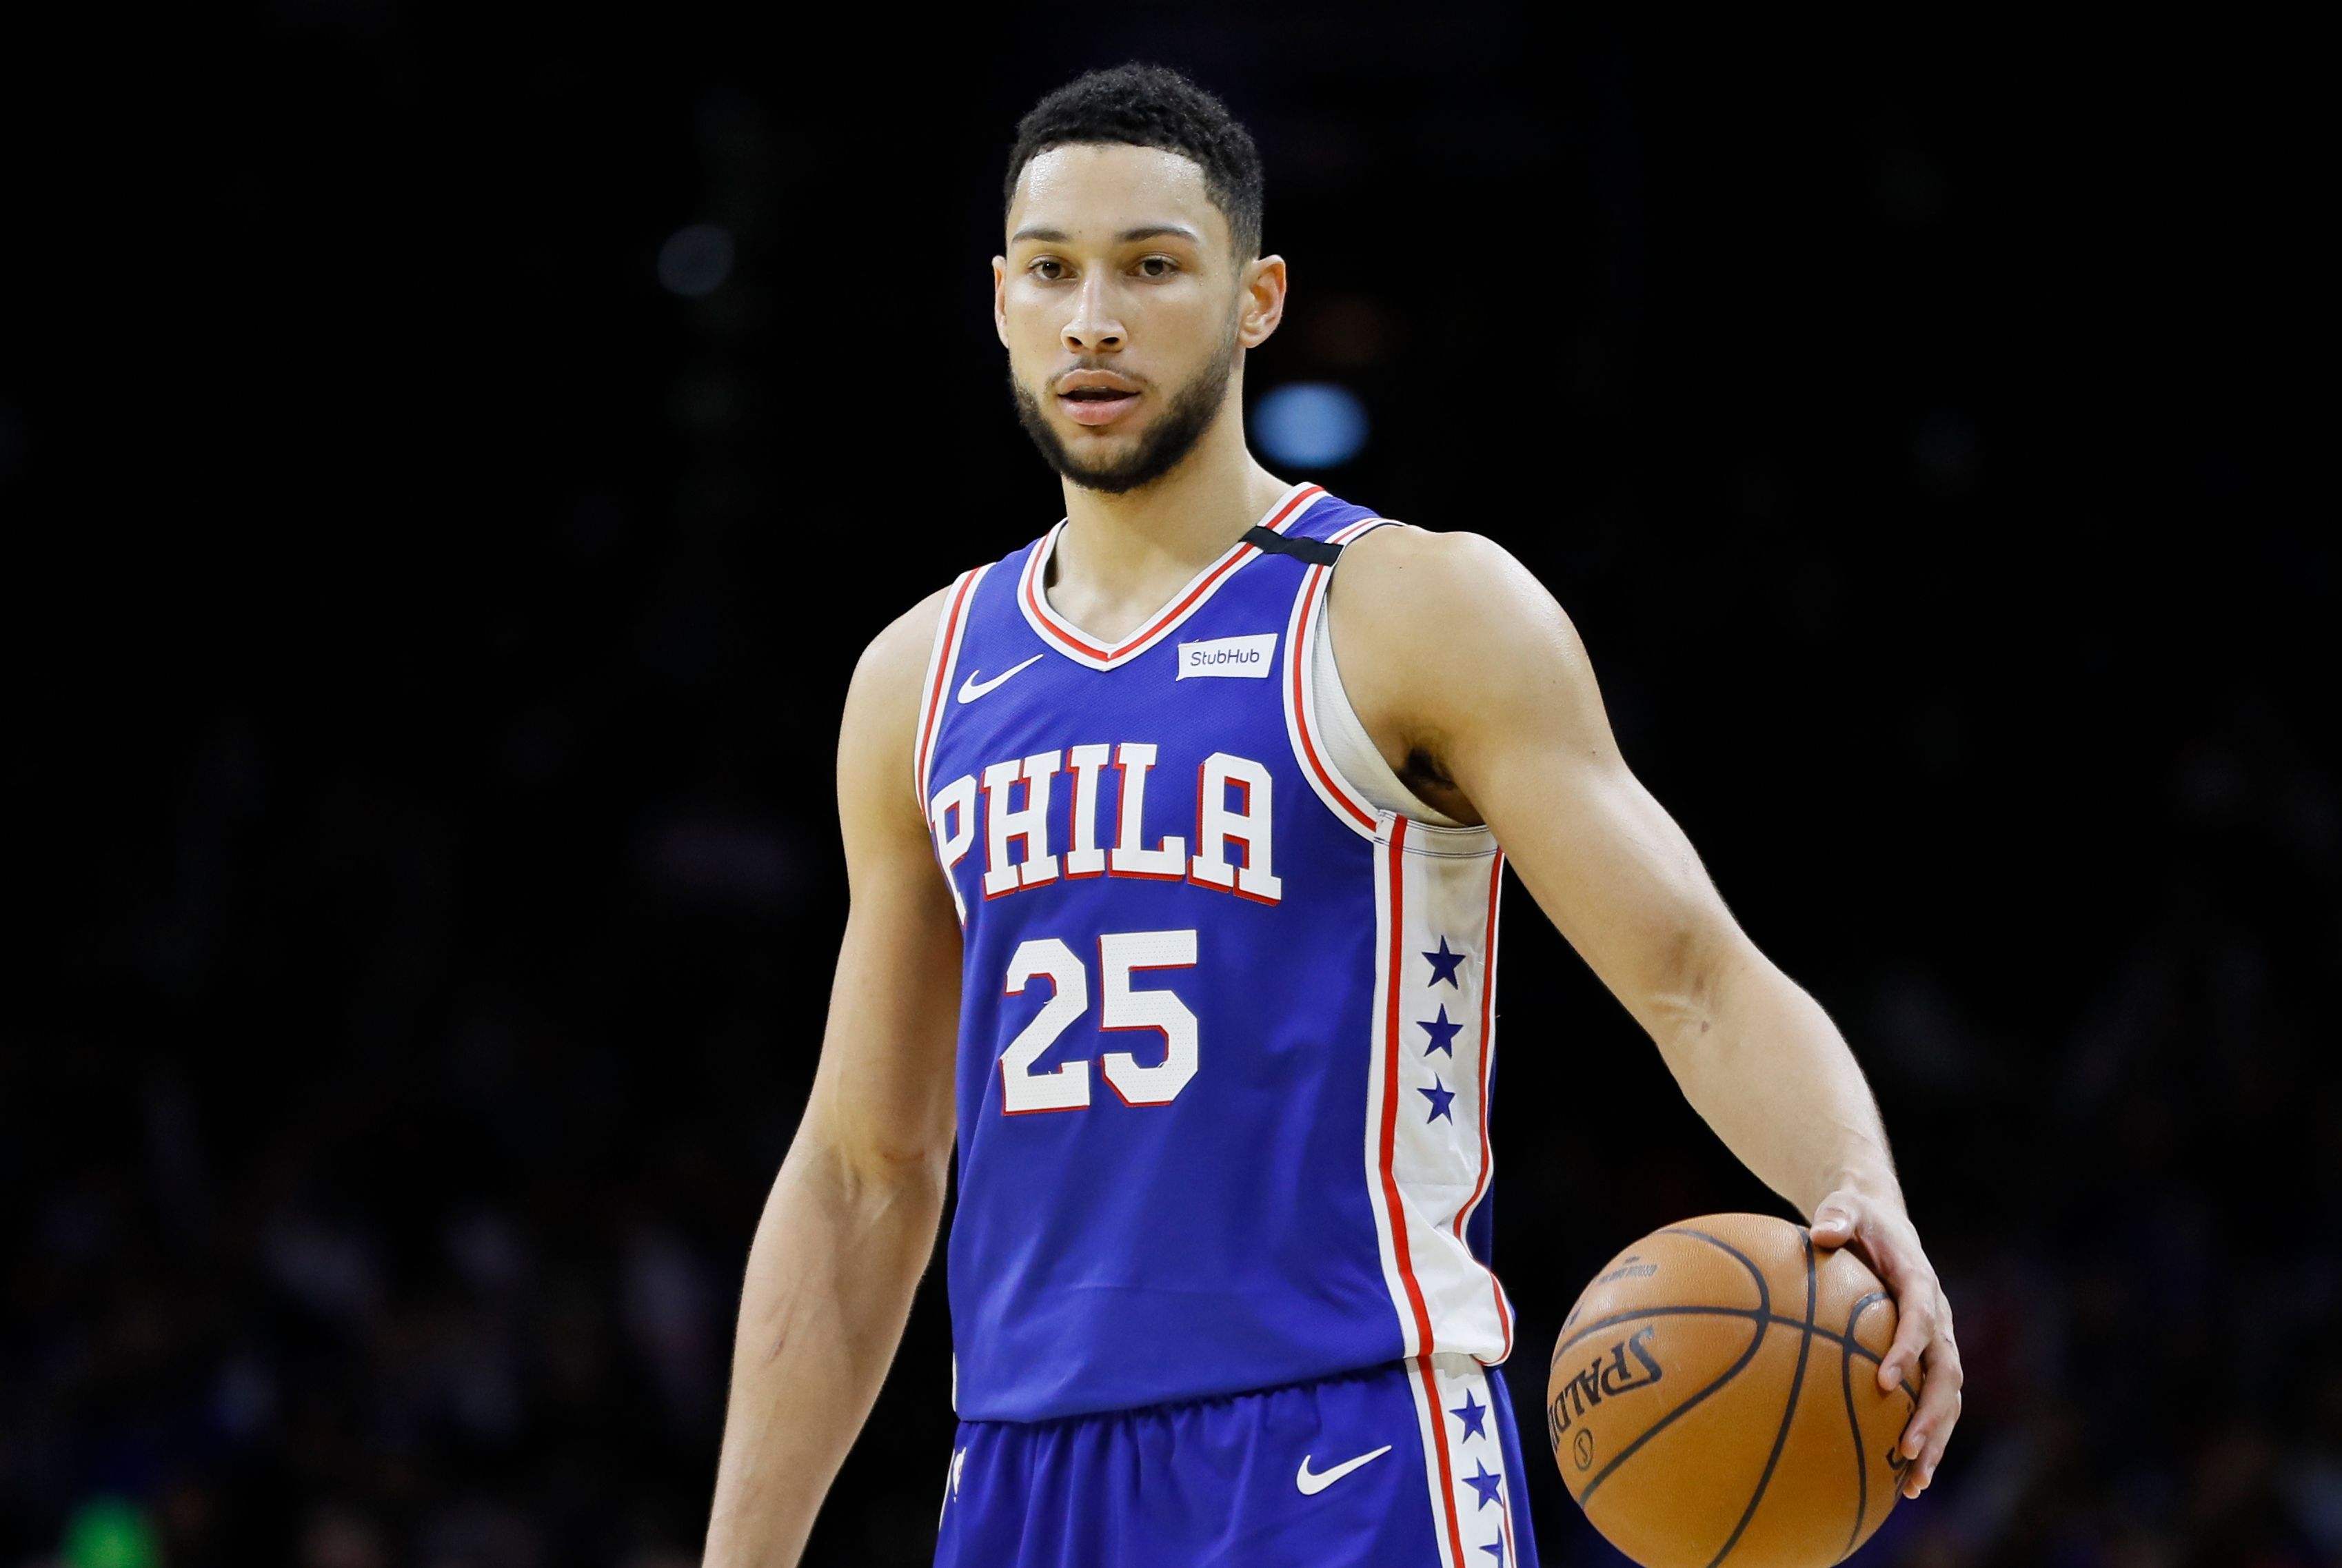 Embiid, Simmons show promise for 76ers